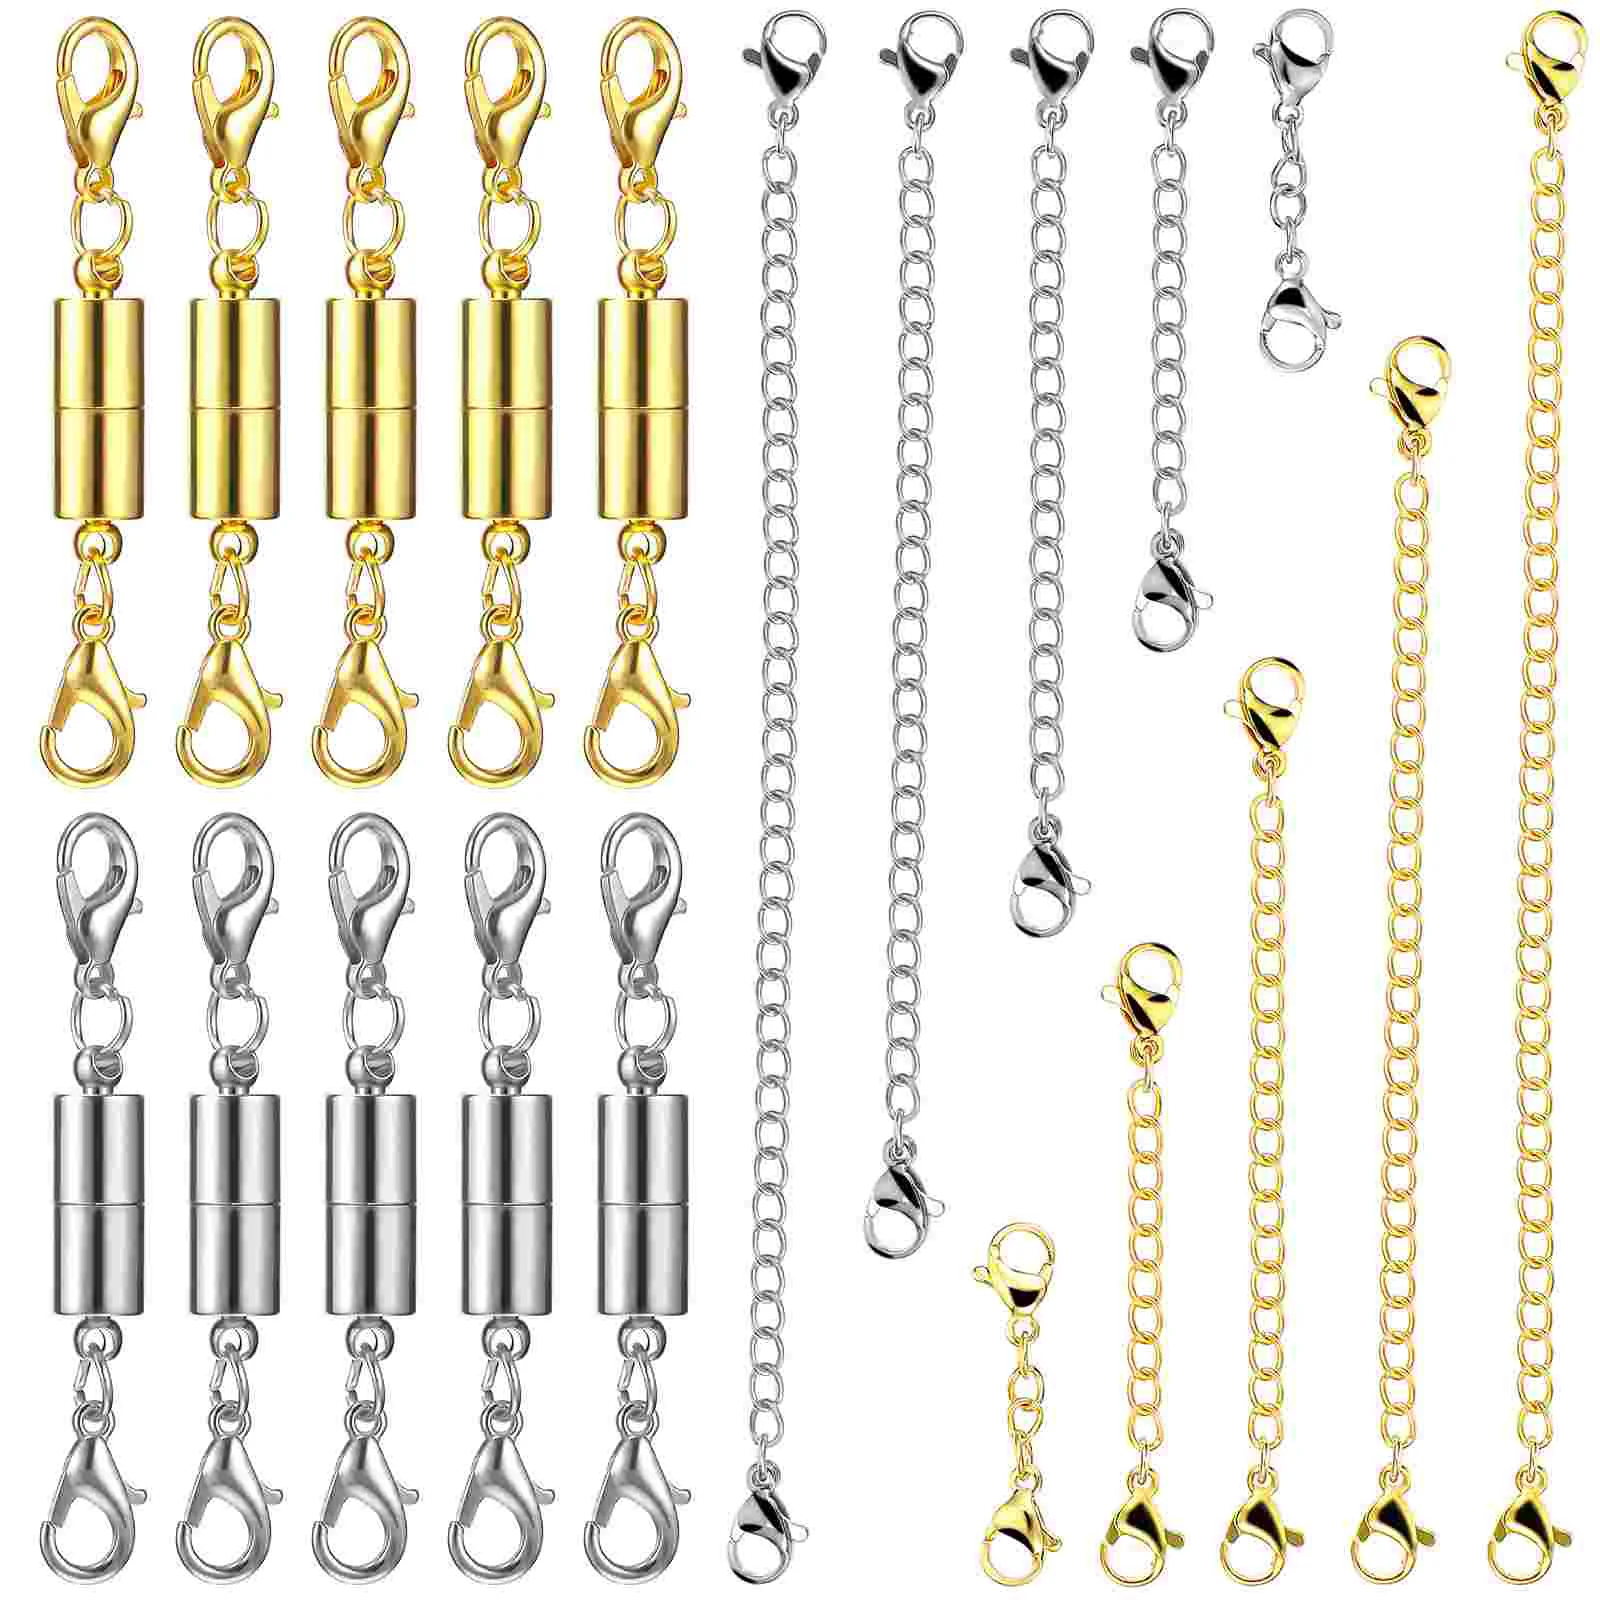 

10 Pcs Chain Extender Sliver Necklace Chains Bracelet Extenders The Magnetic Clasps Stainless Steel Jewelry